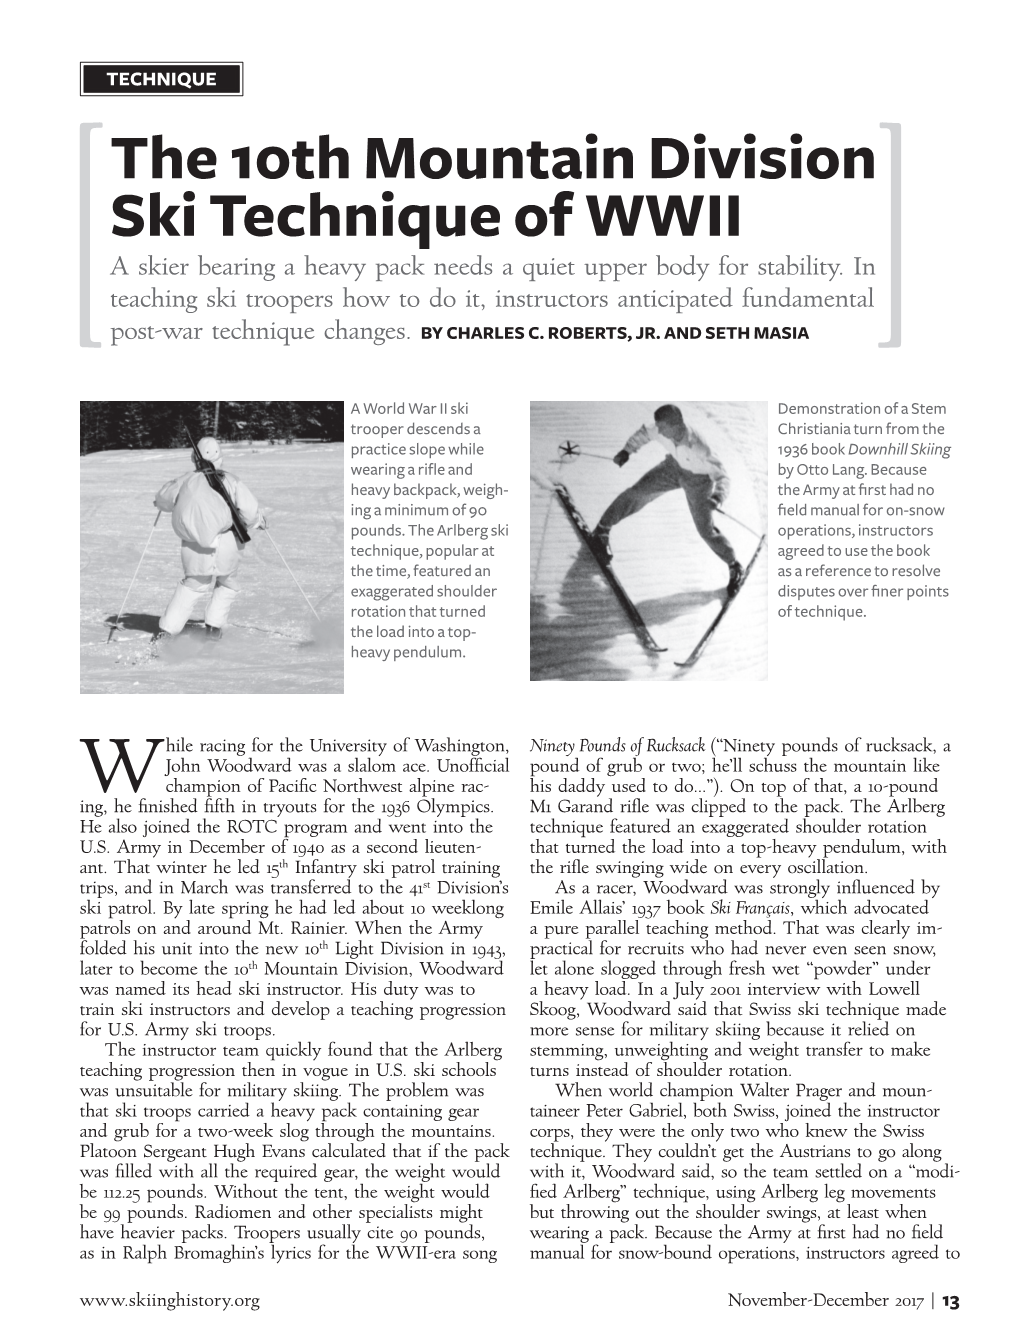 The 10Th Mountain Division Ski Technique of WWII a Skier Bearing a Heavy Pack Needs a Quiet Upper Body for Stability